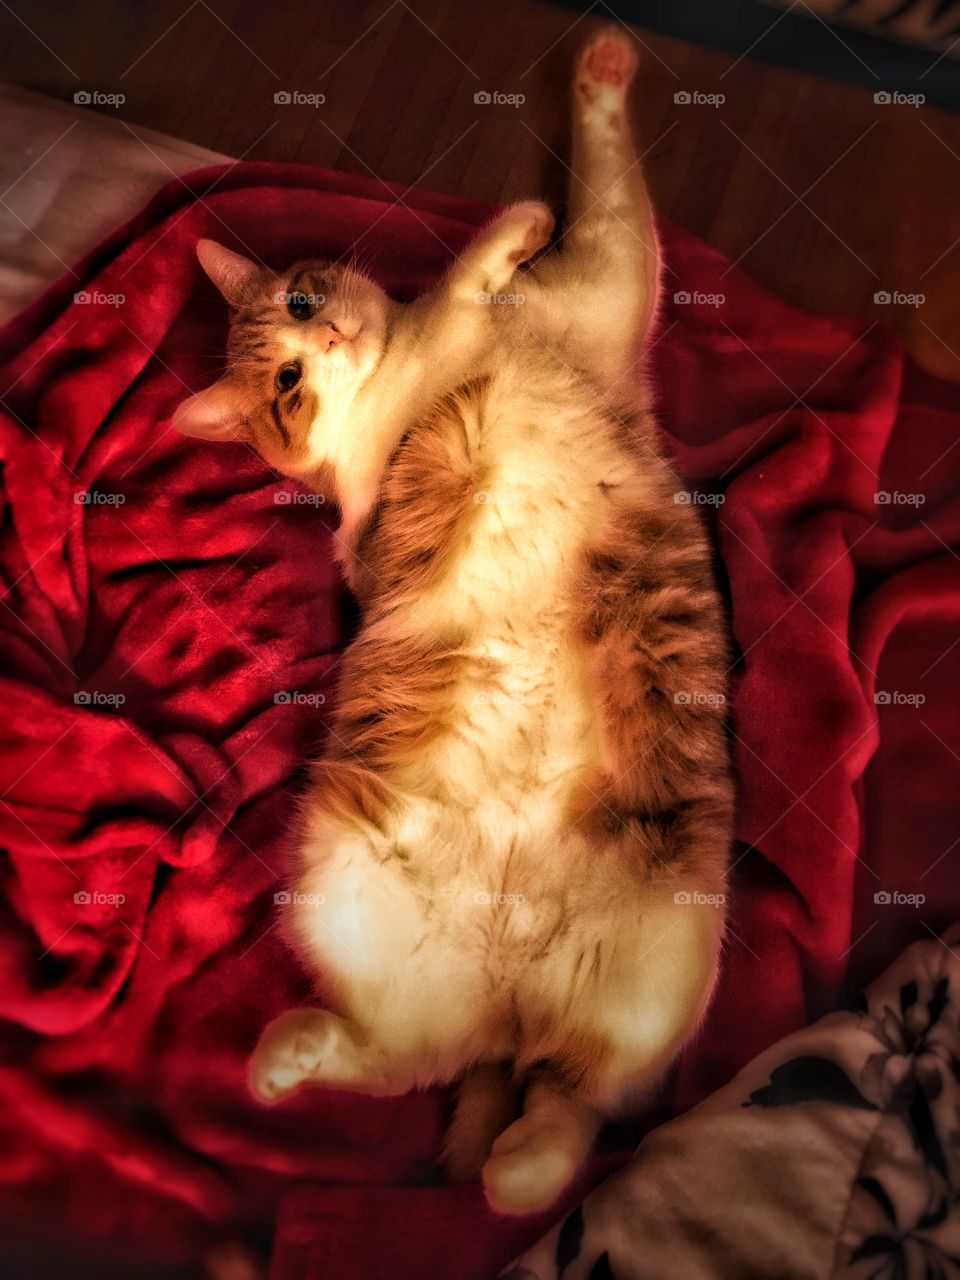 Lazy cat sleeping on red blanket